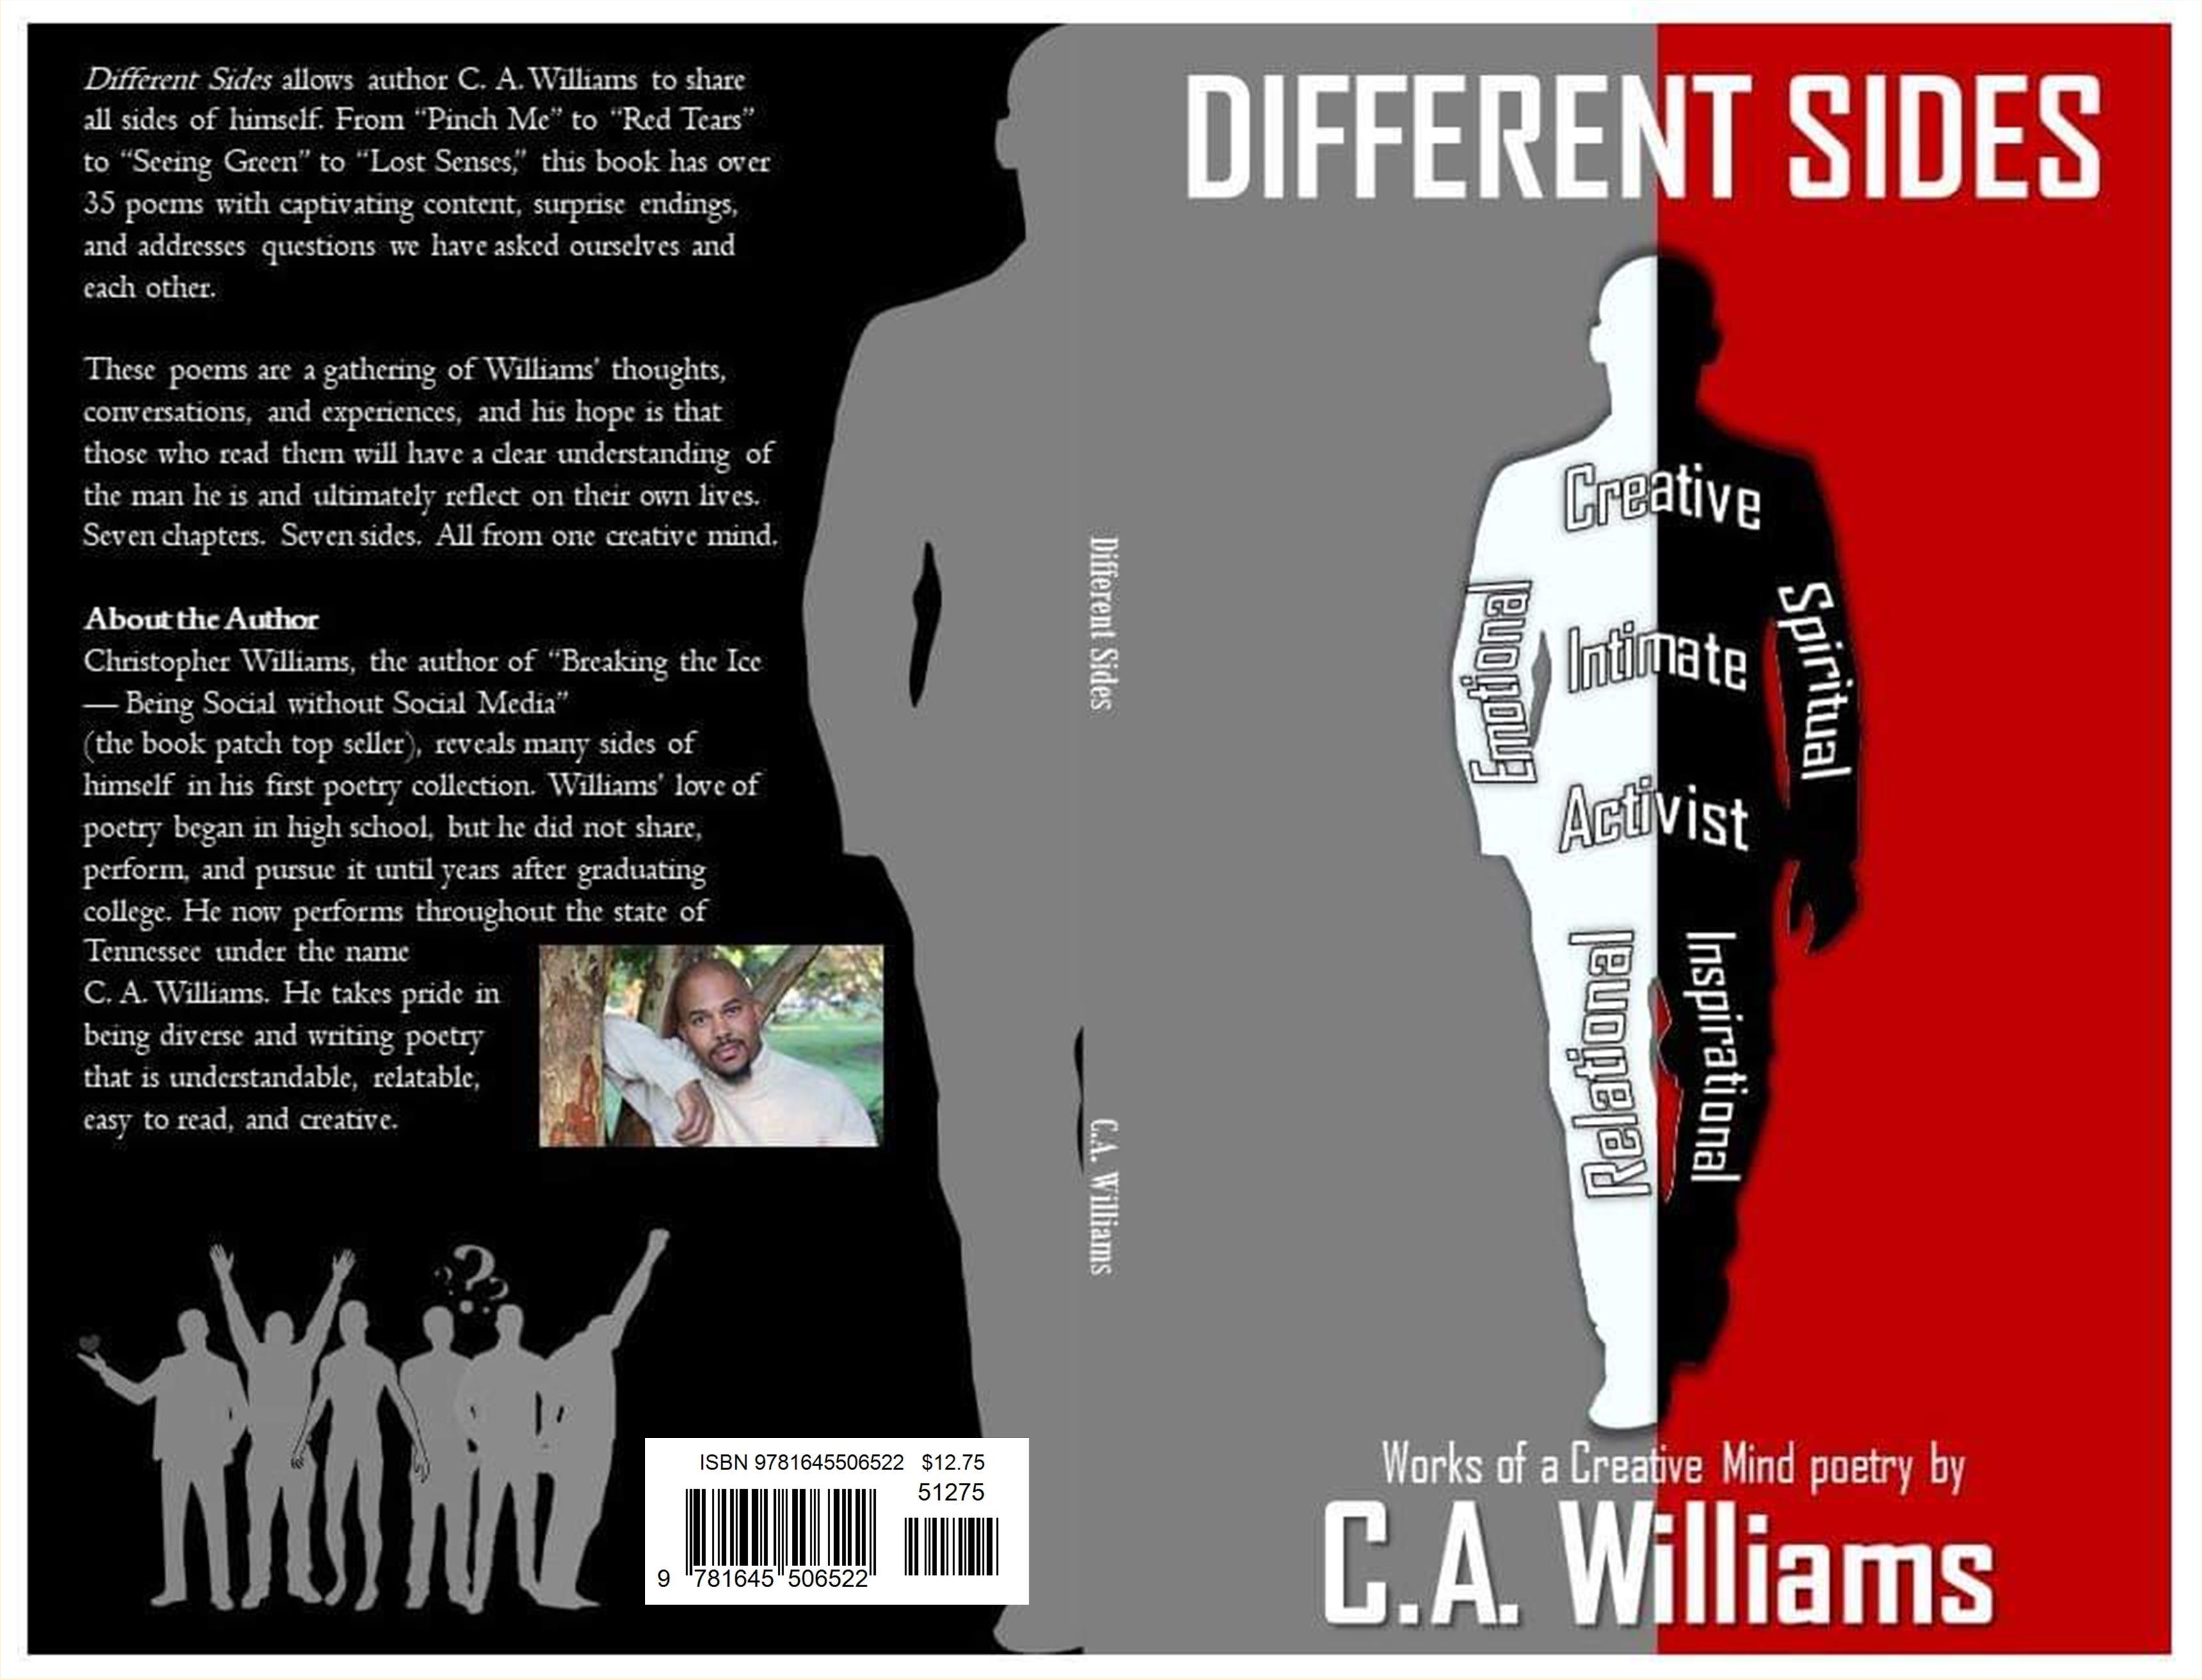 Different Sides - Works of a Creative Mind poetry cover image